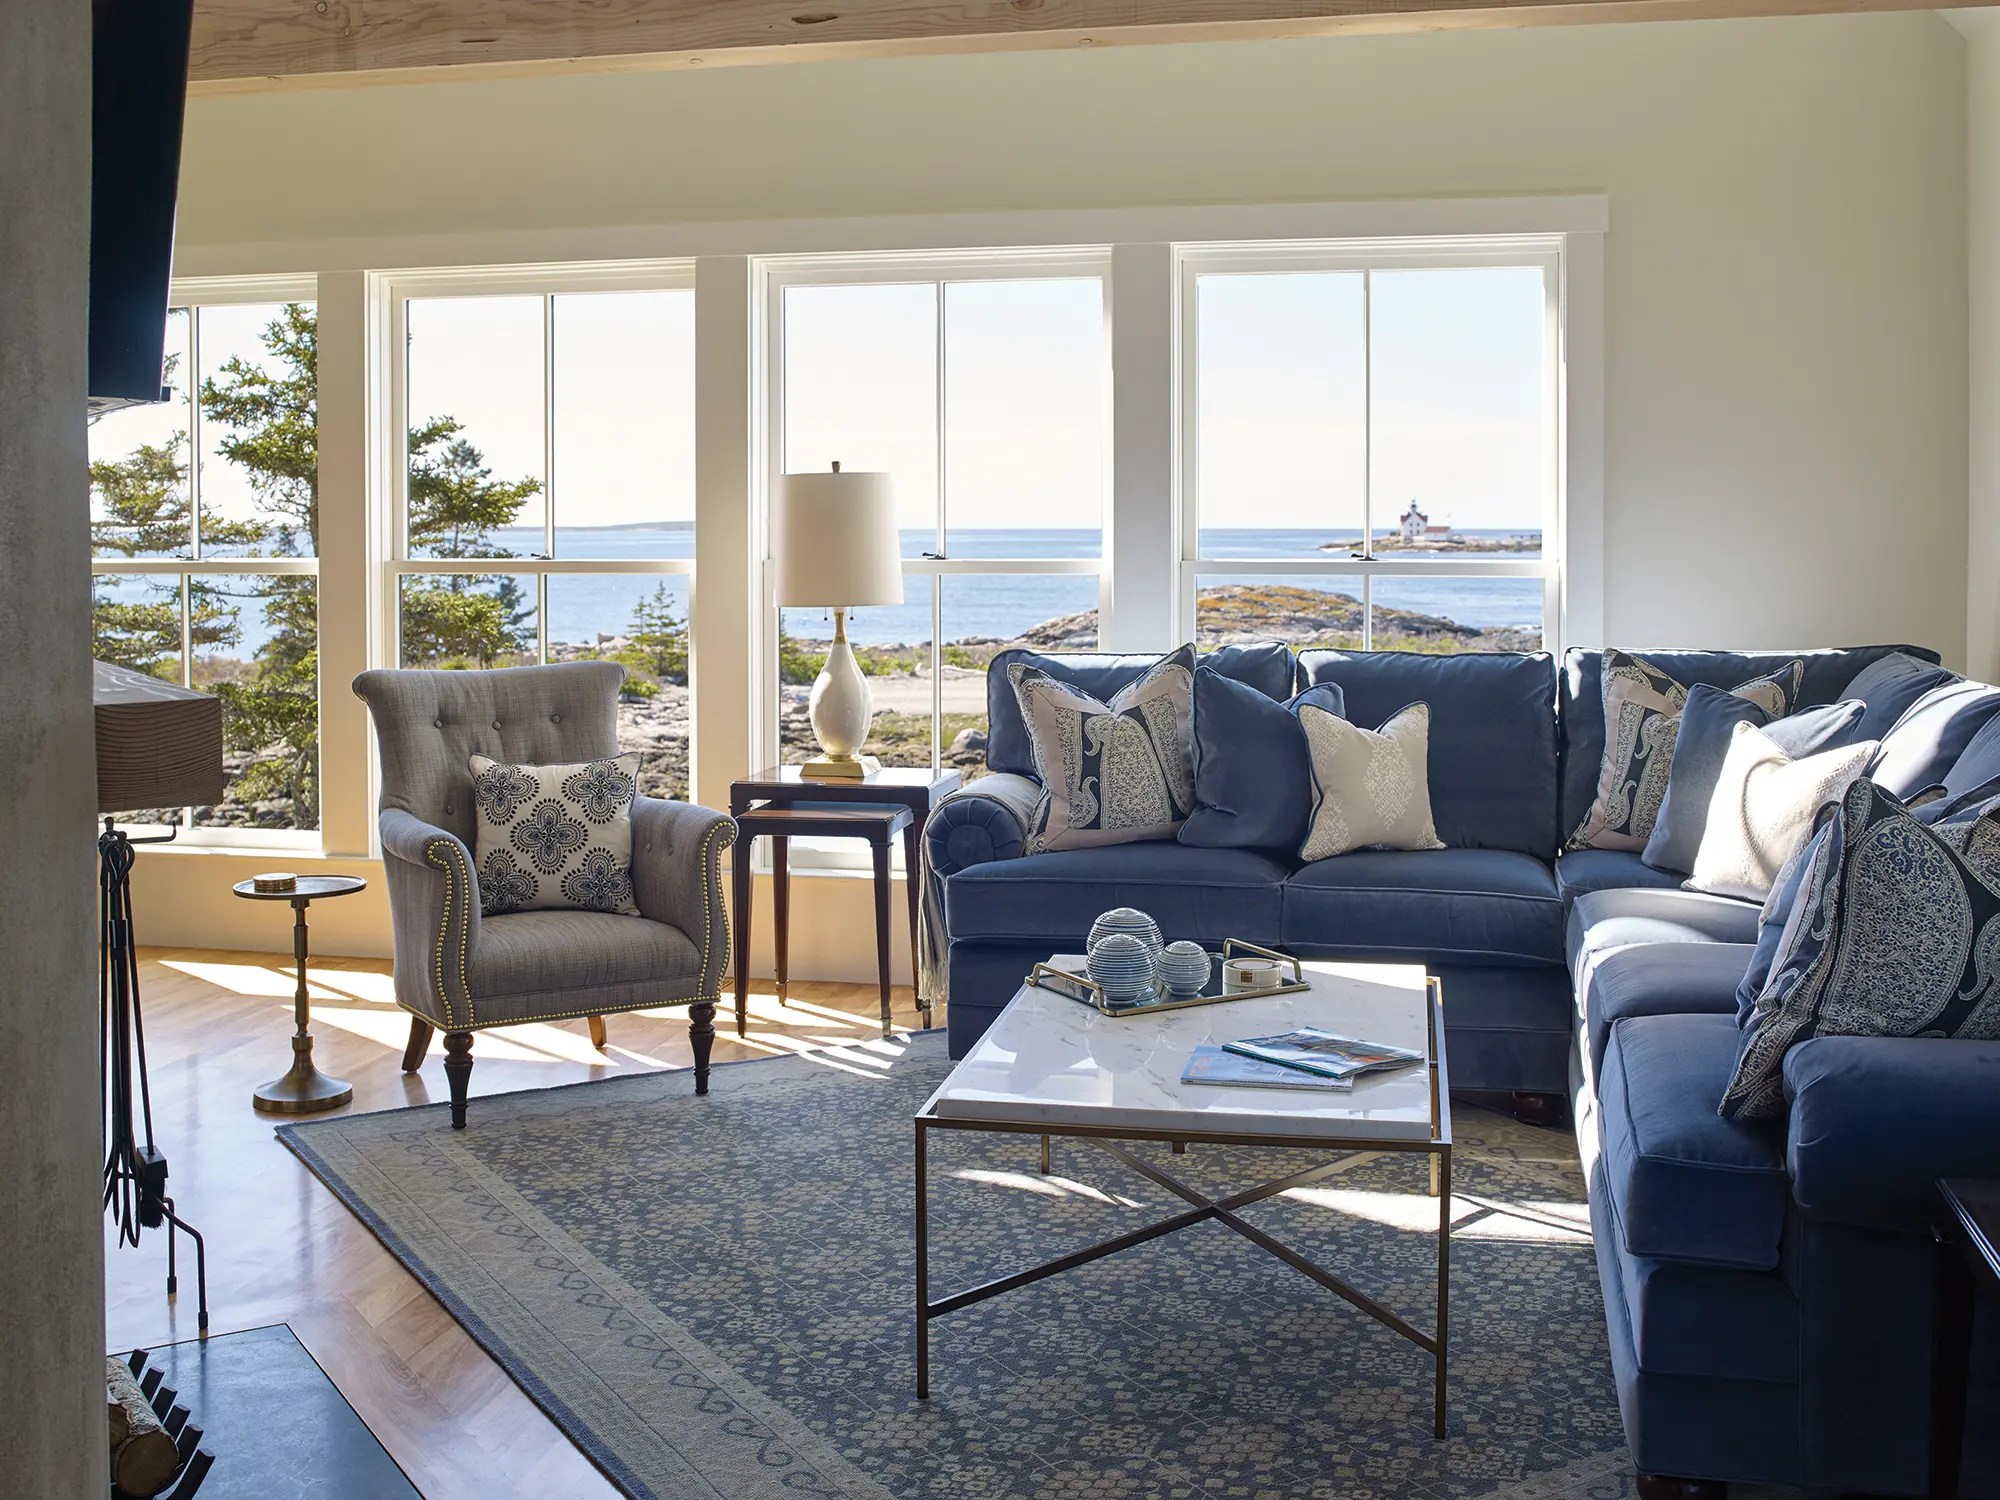 Town Landing living room with view of coast